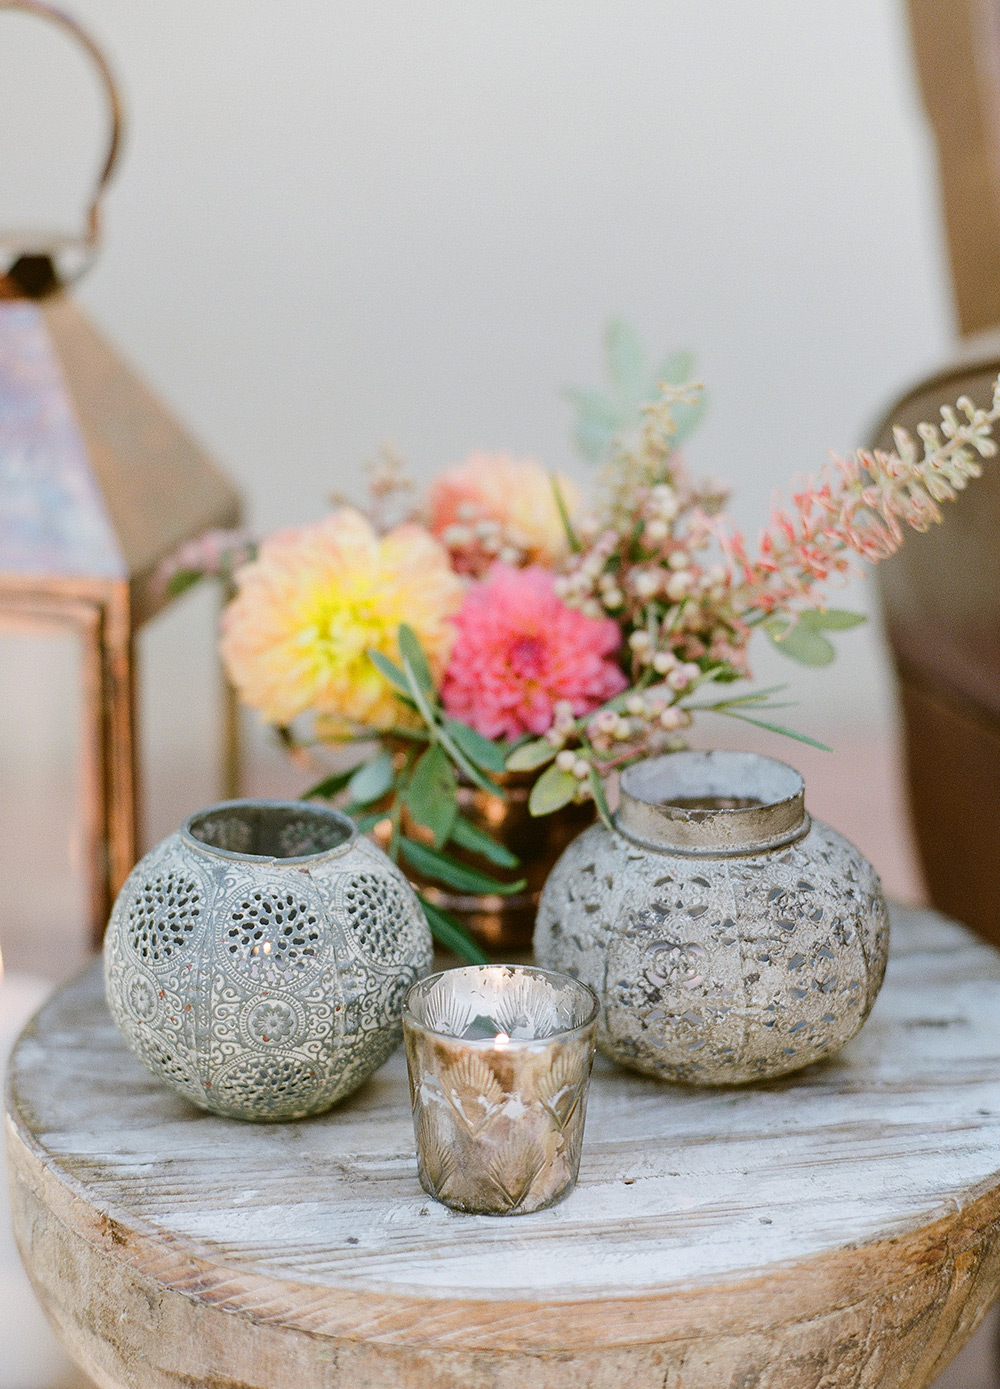 How to find the perfect vendors for your wedding with The Firefly Method